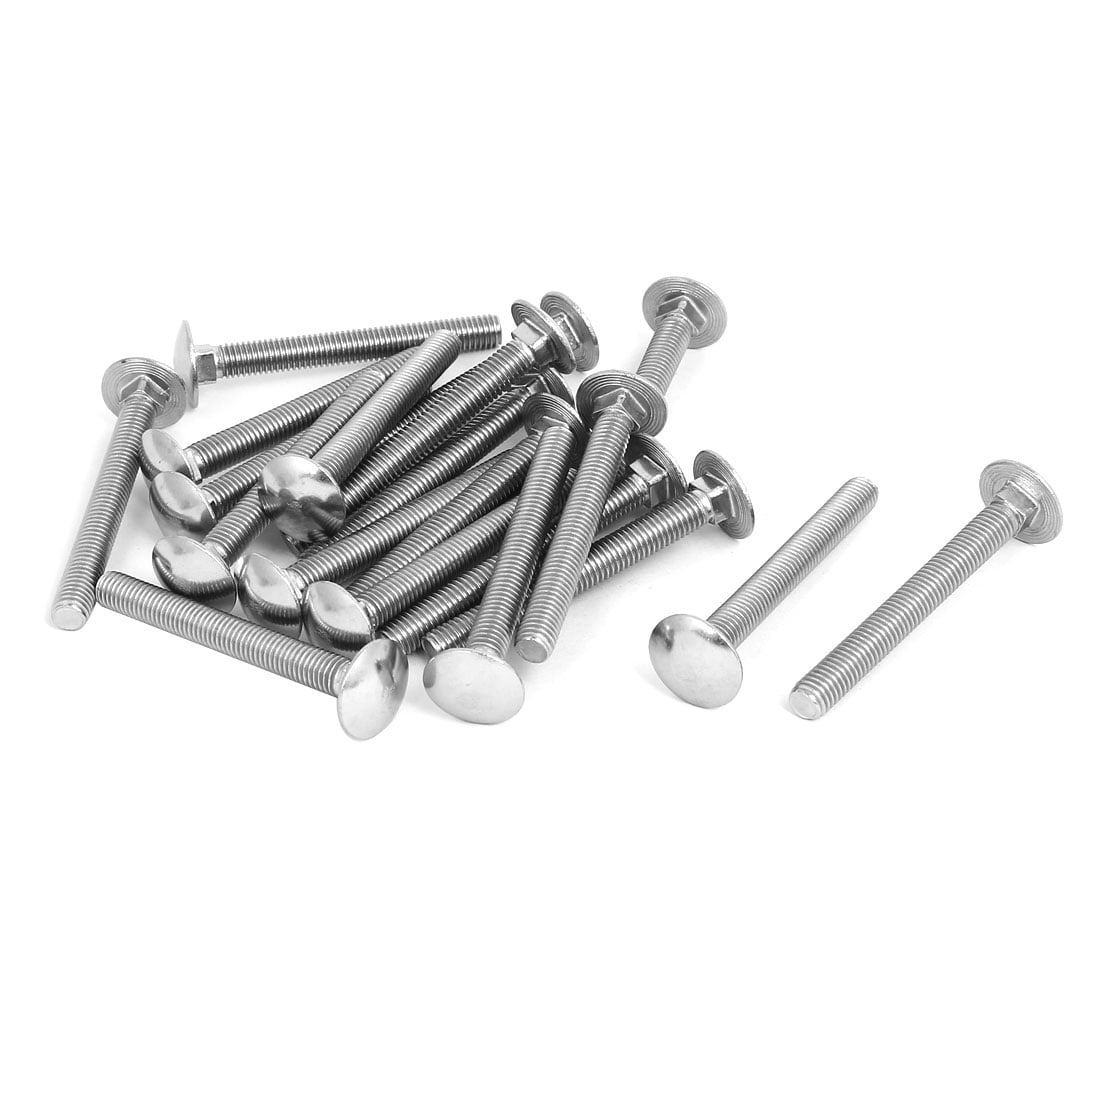 Steel Cup Square Carriage Bolt & Nut 8mm x 70mm Pack of 10 M8